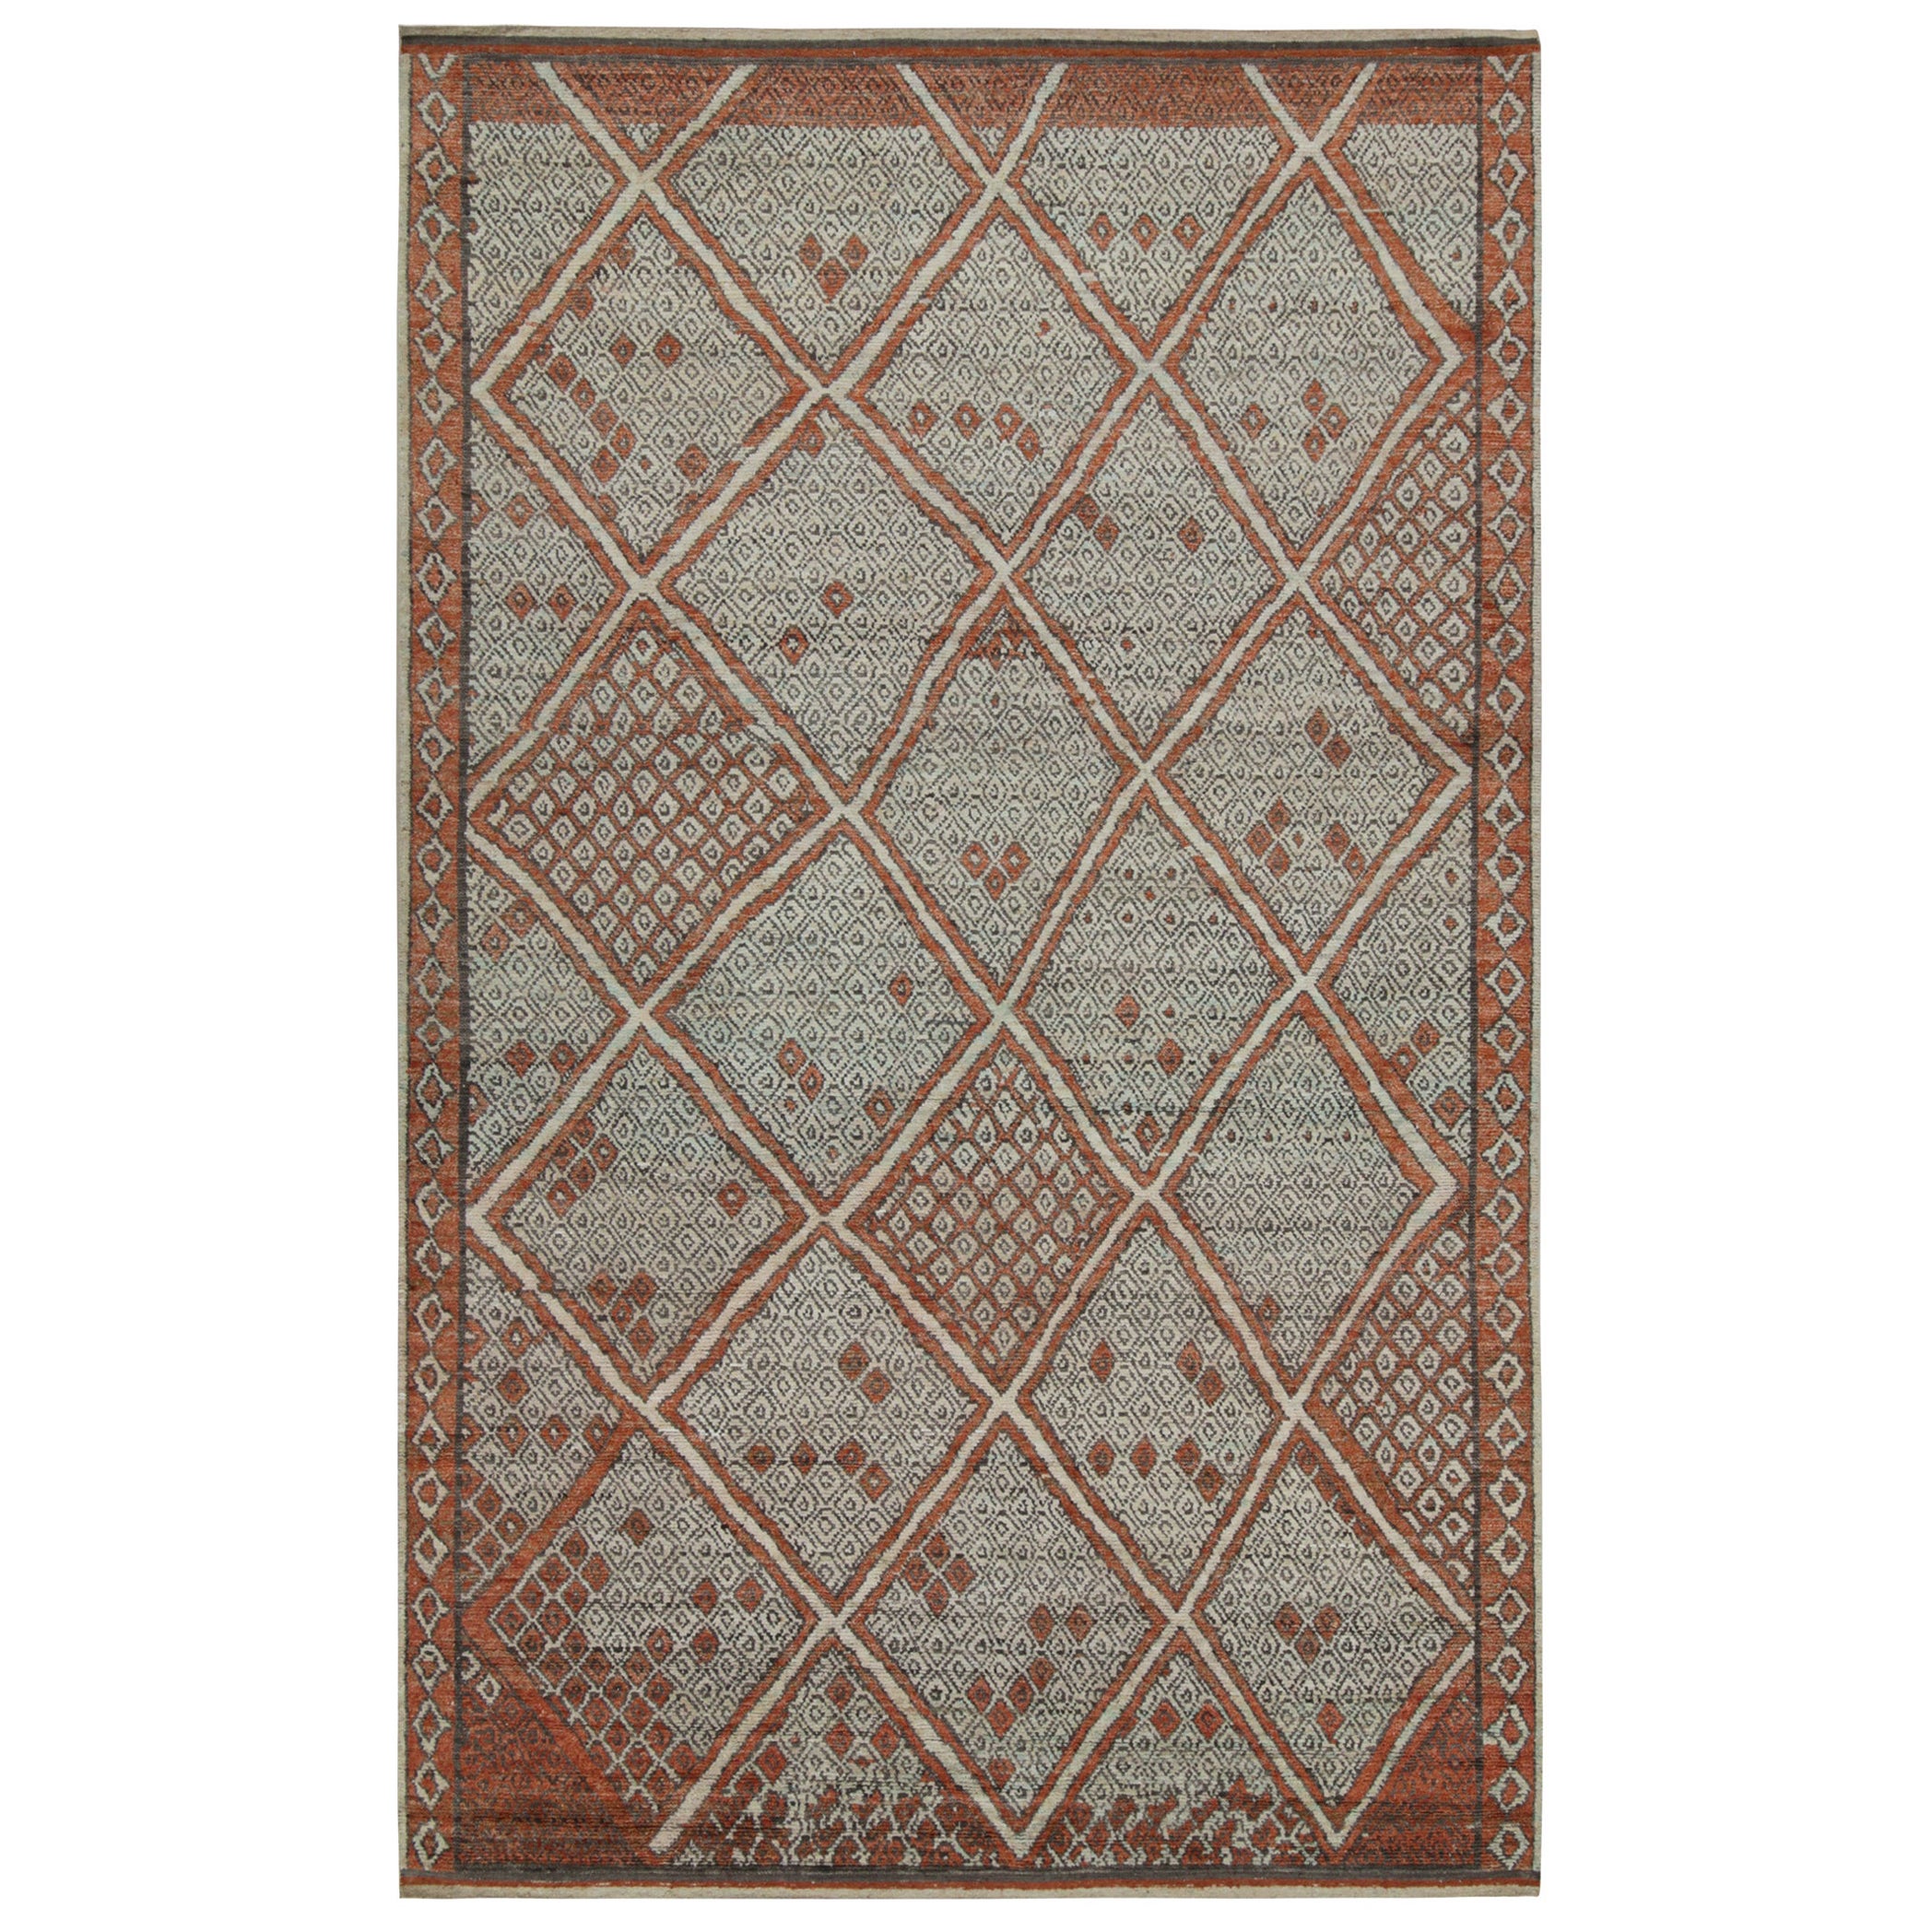 Rug & Kilim’s Moroccan Style Rug in Auburn Red and Gray Diamond Patterns For Sale